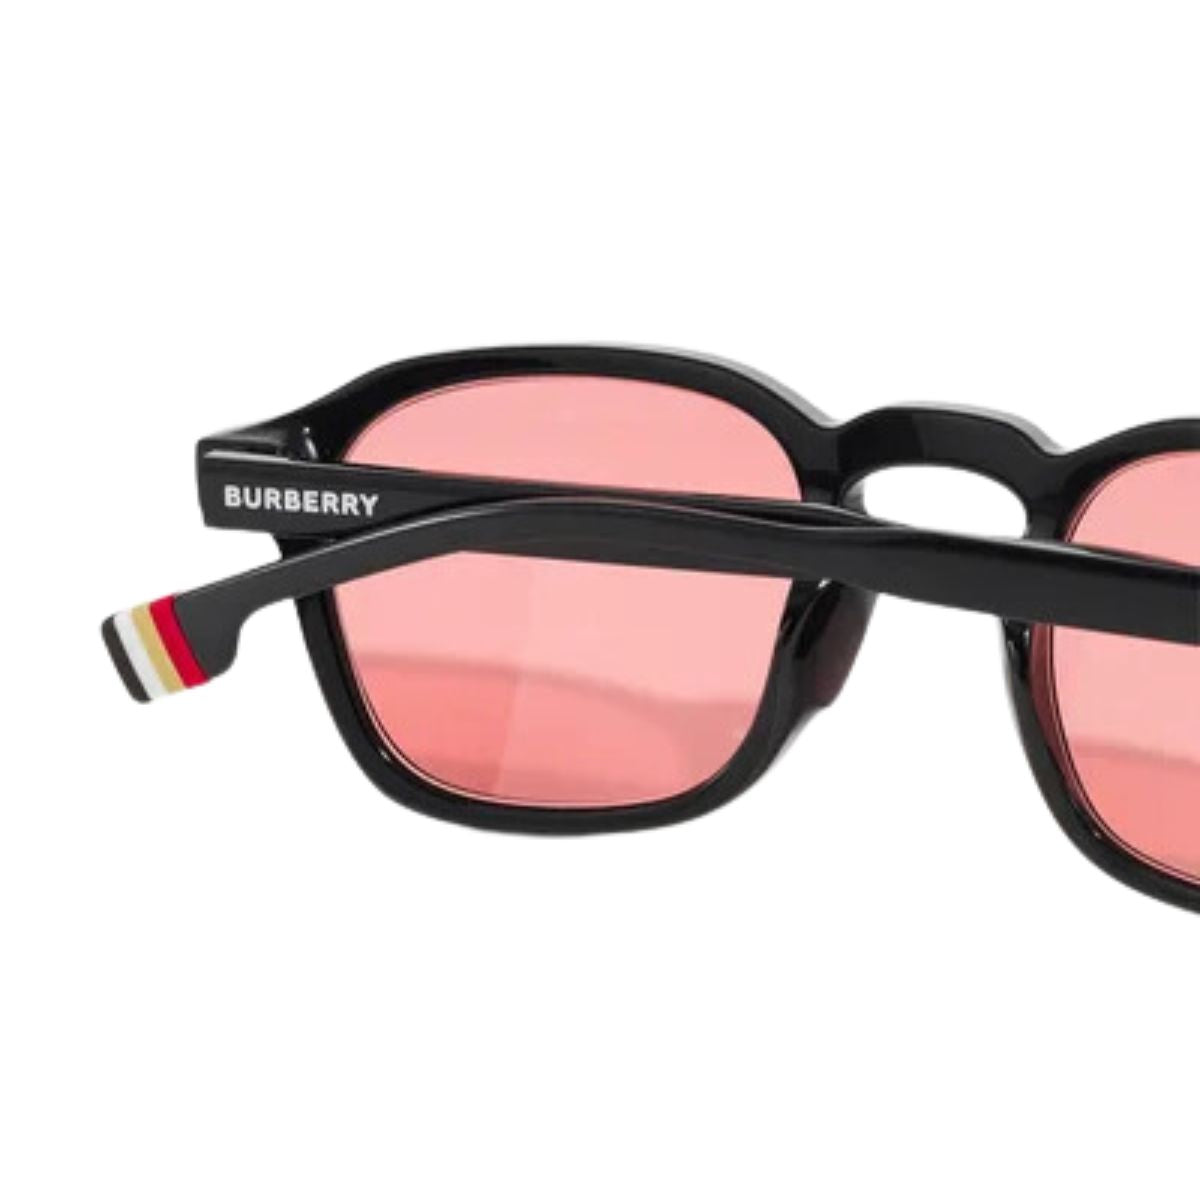 "E-commerce shopping page featuring Burberry 4378-U 3001/84 unisex sunglasses, highlighting the best deals, free shipping, and how they perfect any look for both men and women."